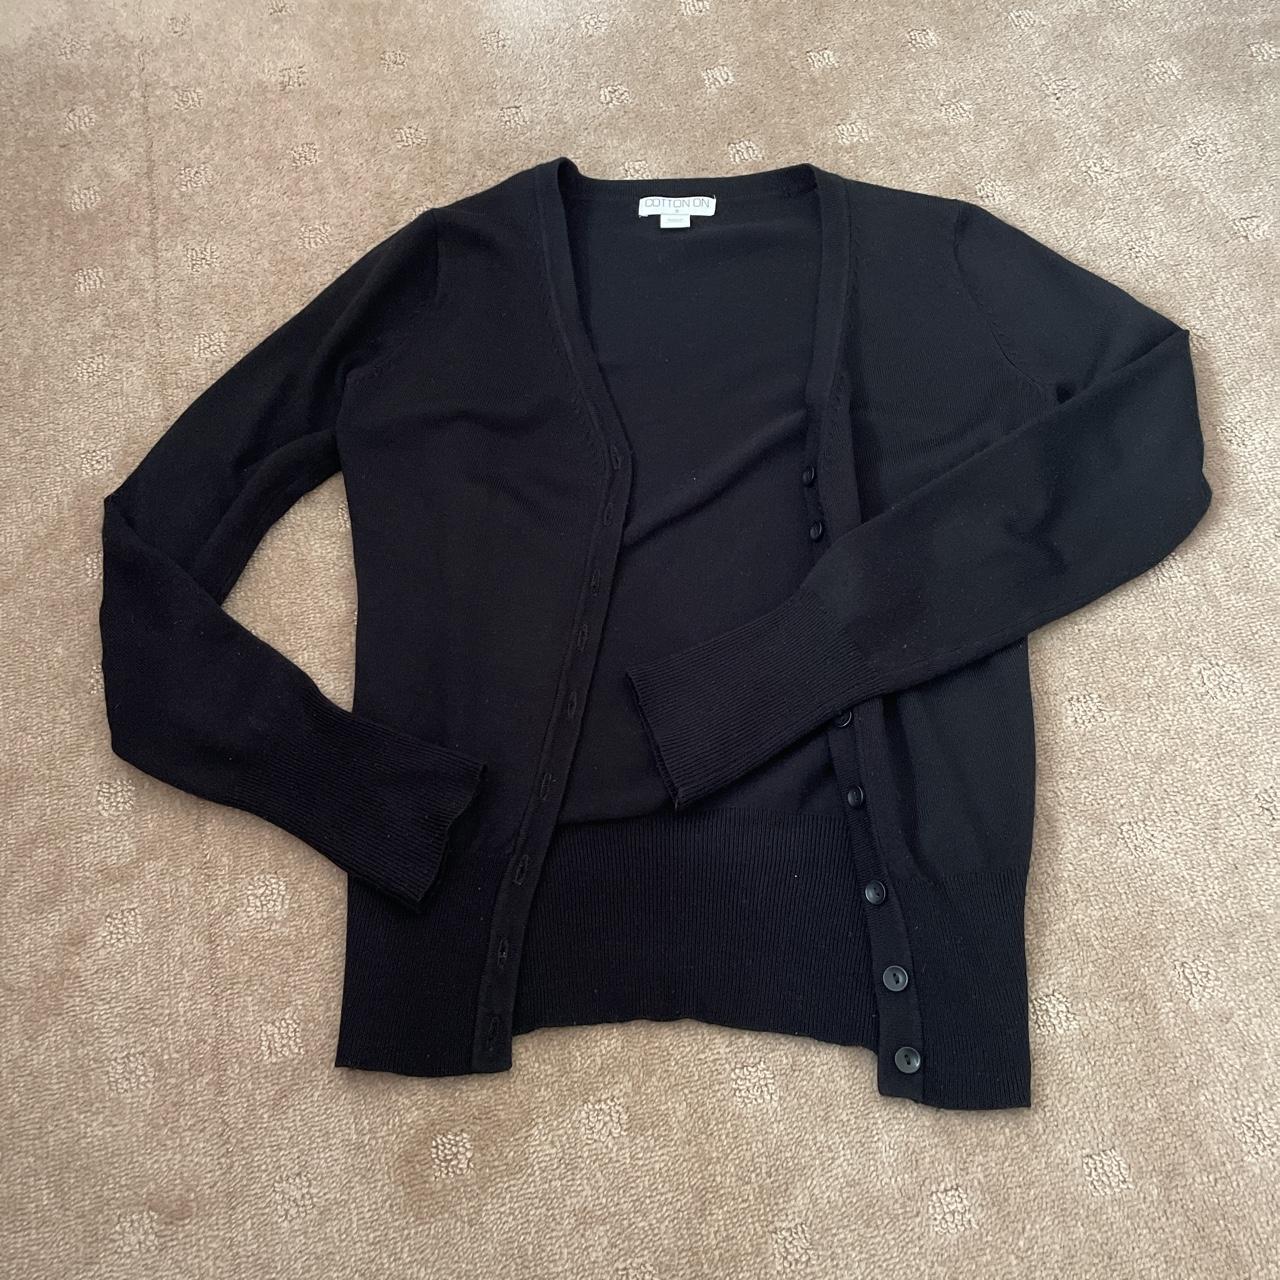 cotton on basic black cardigan size S, in great... - Depop